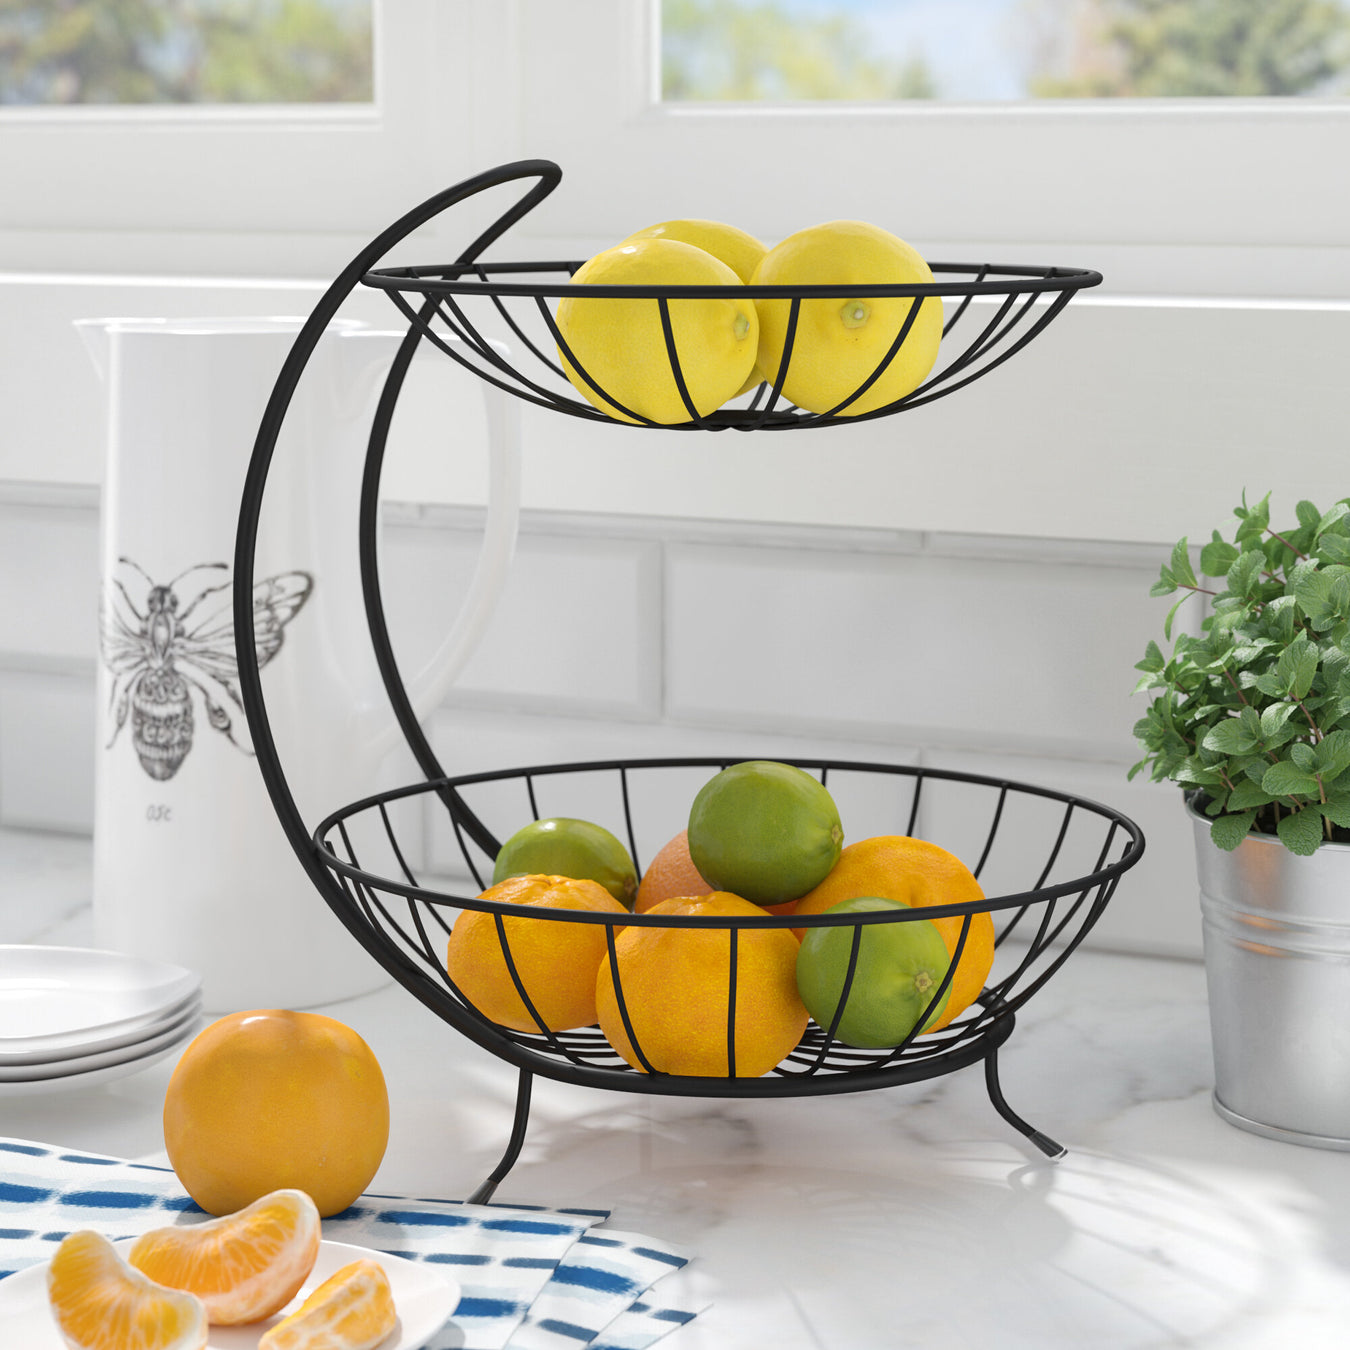 Adunnis Fruit Bowls & Stands